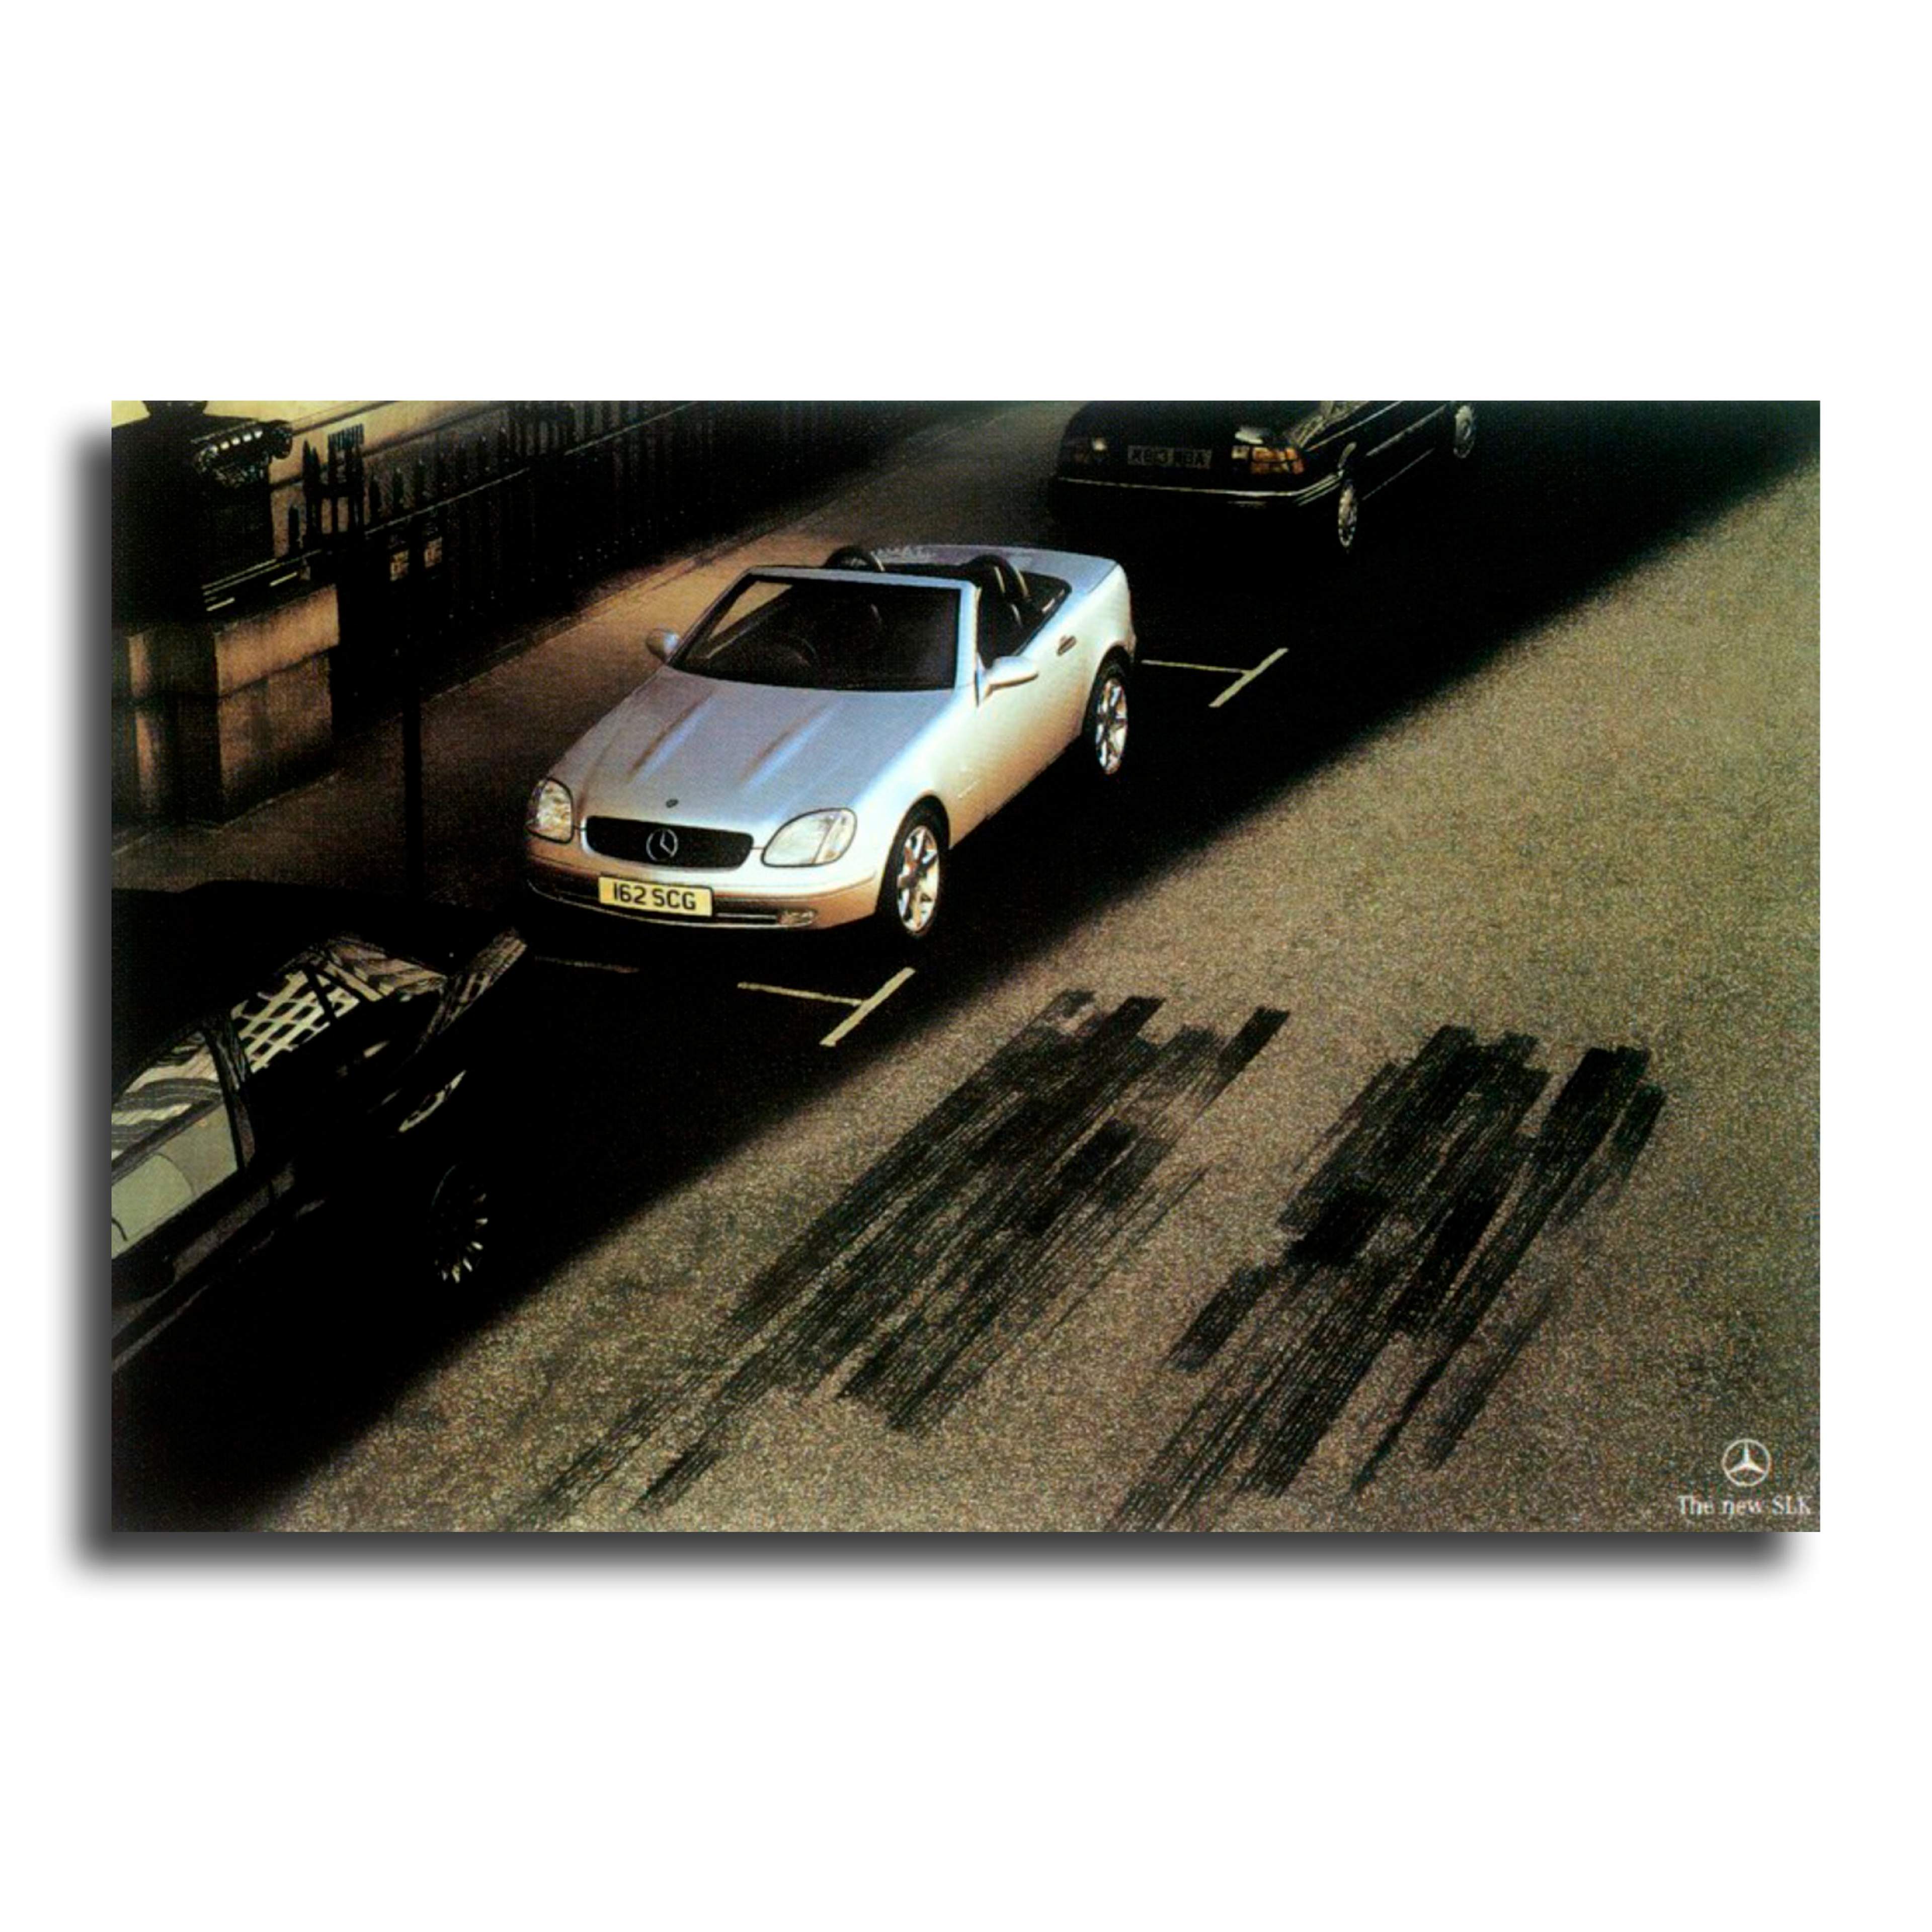 Photograph of a silver Mercedes Benz SLK with skid marks on the road. 